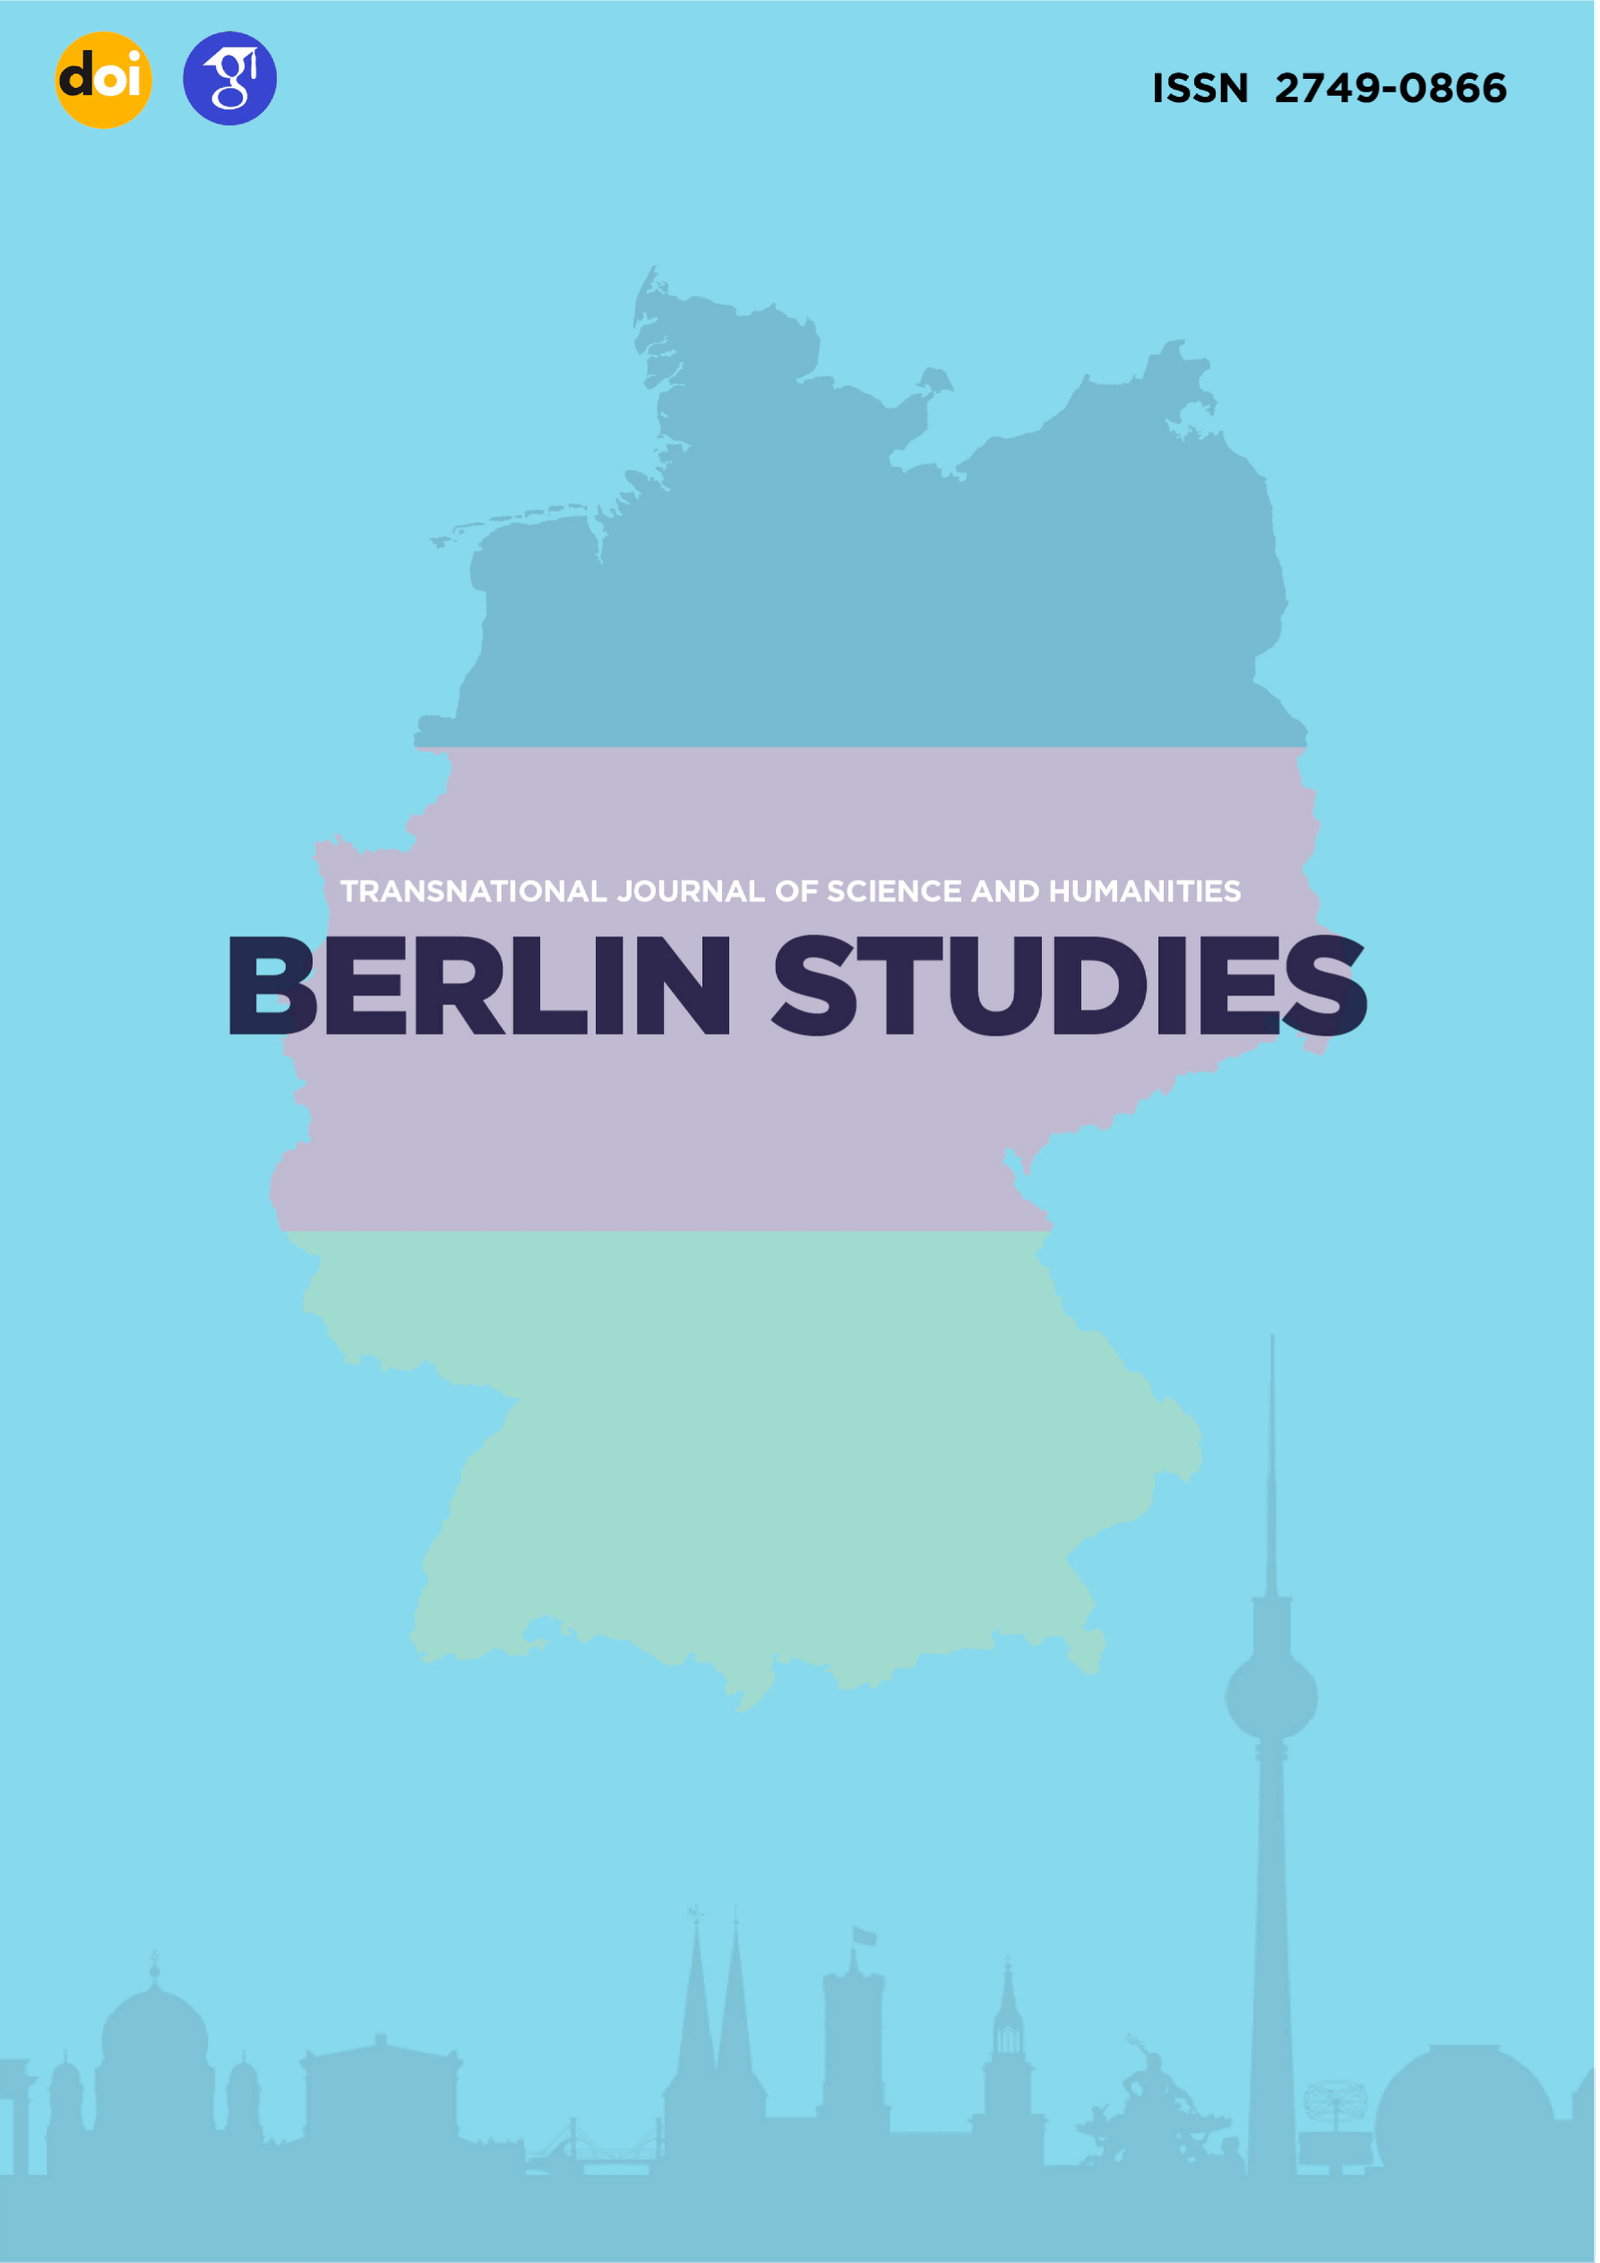 					View Vol. 3 No. 1.10 Sociological sciences (2023): Berlin Studies Transnational Journal of Science and Humanities
				